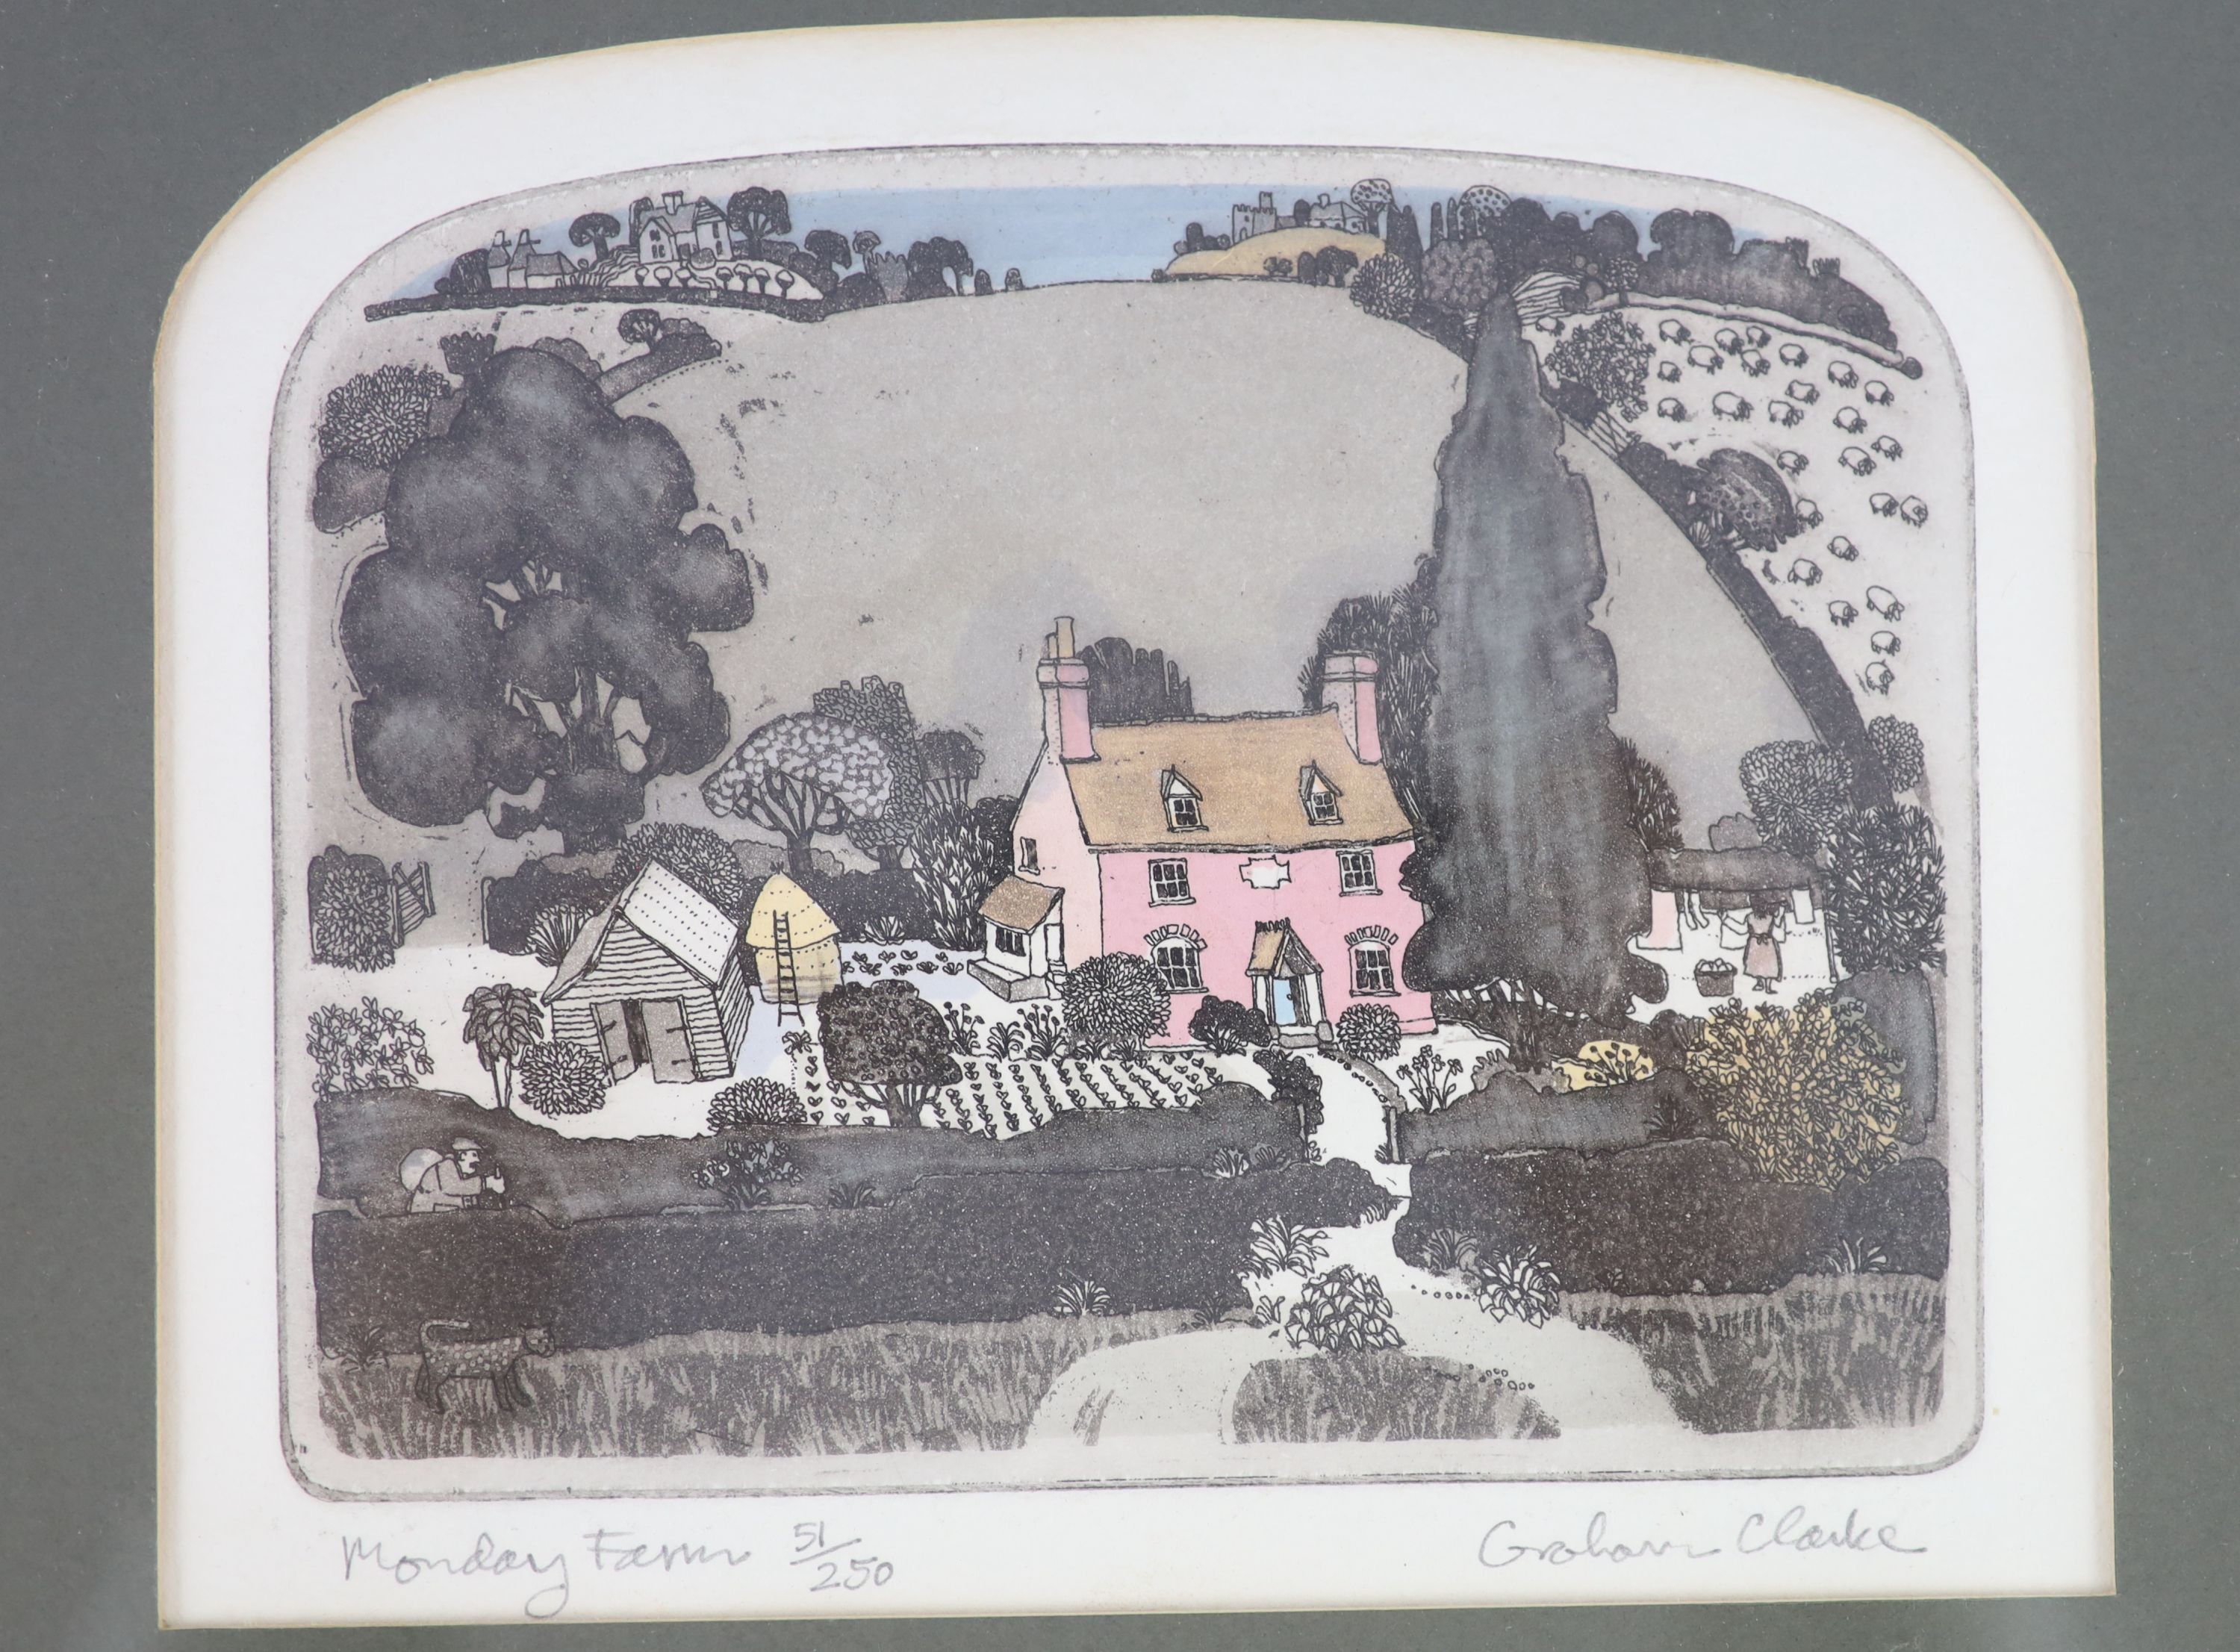 Graham Clarke. Monday Farm. Hand-coloured etching with aquatint. 13.5 x 17cm. Mounted, framed and glazed. Titled, signed, and numbered in pencil by the artist below the image. Number 51 0f 250.